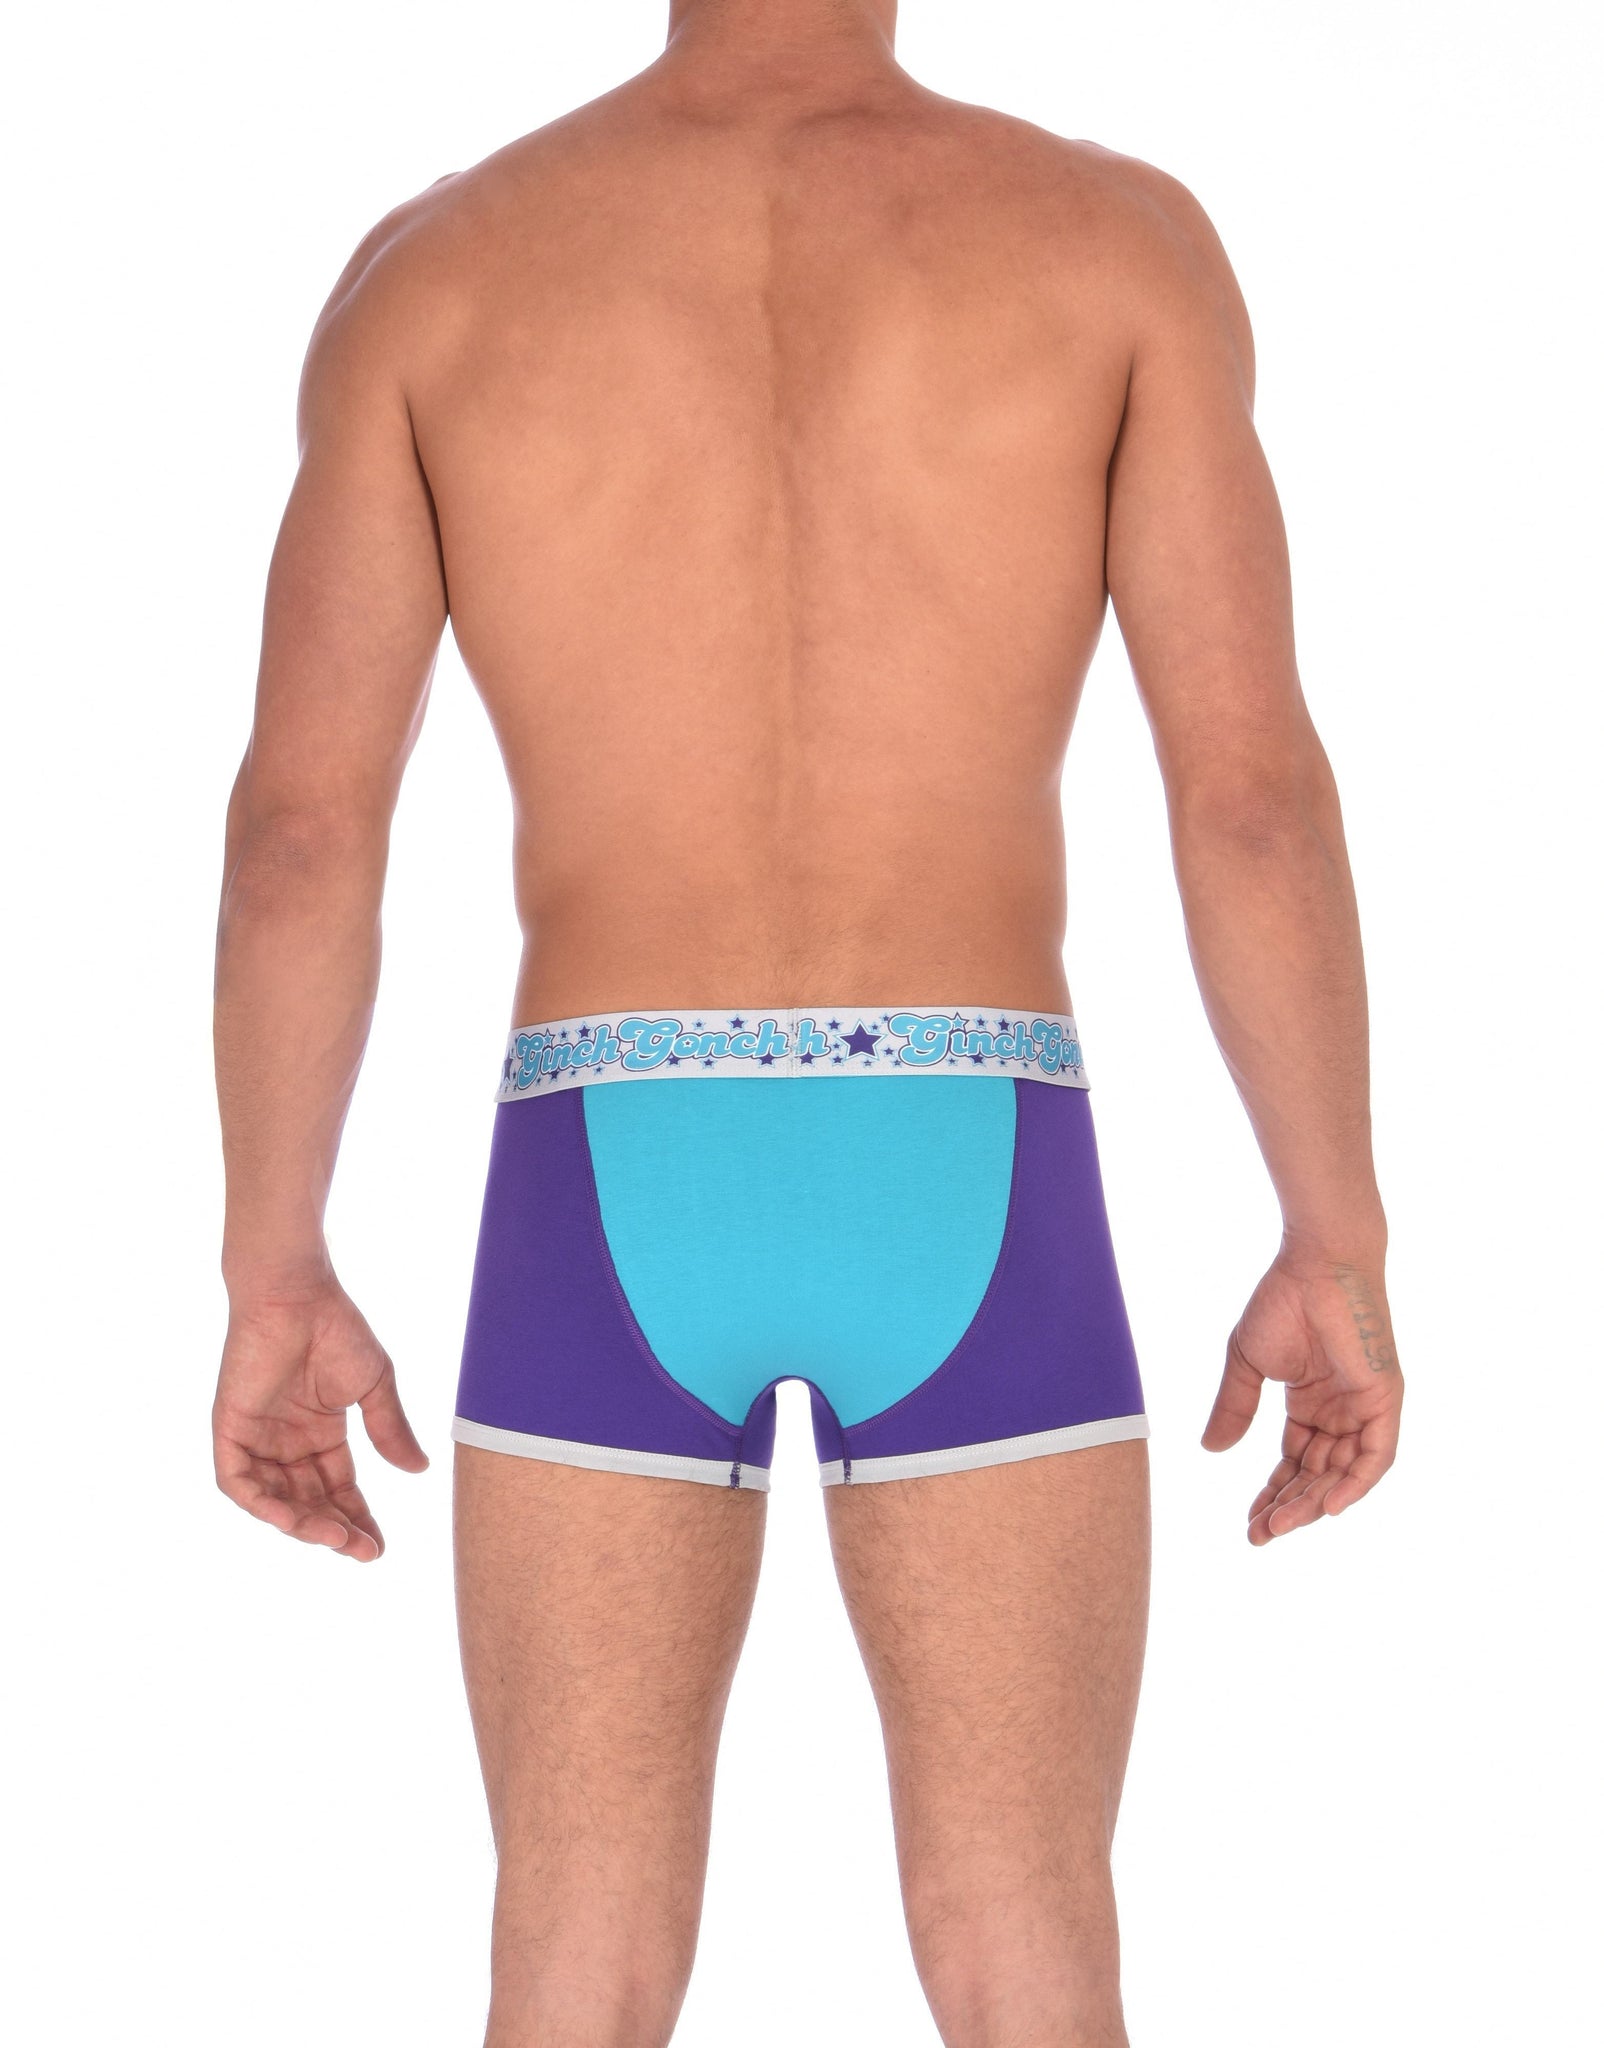 GG Ginch Gonch Purple Haze Trunk Boxer Brief y front - Men's Underwear purple and aqua panels with grey trim and silver printed waistband back